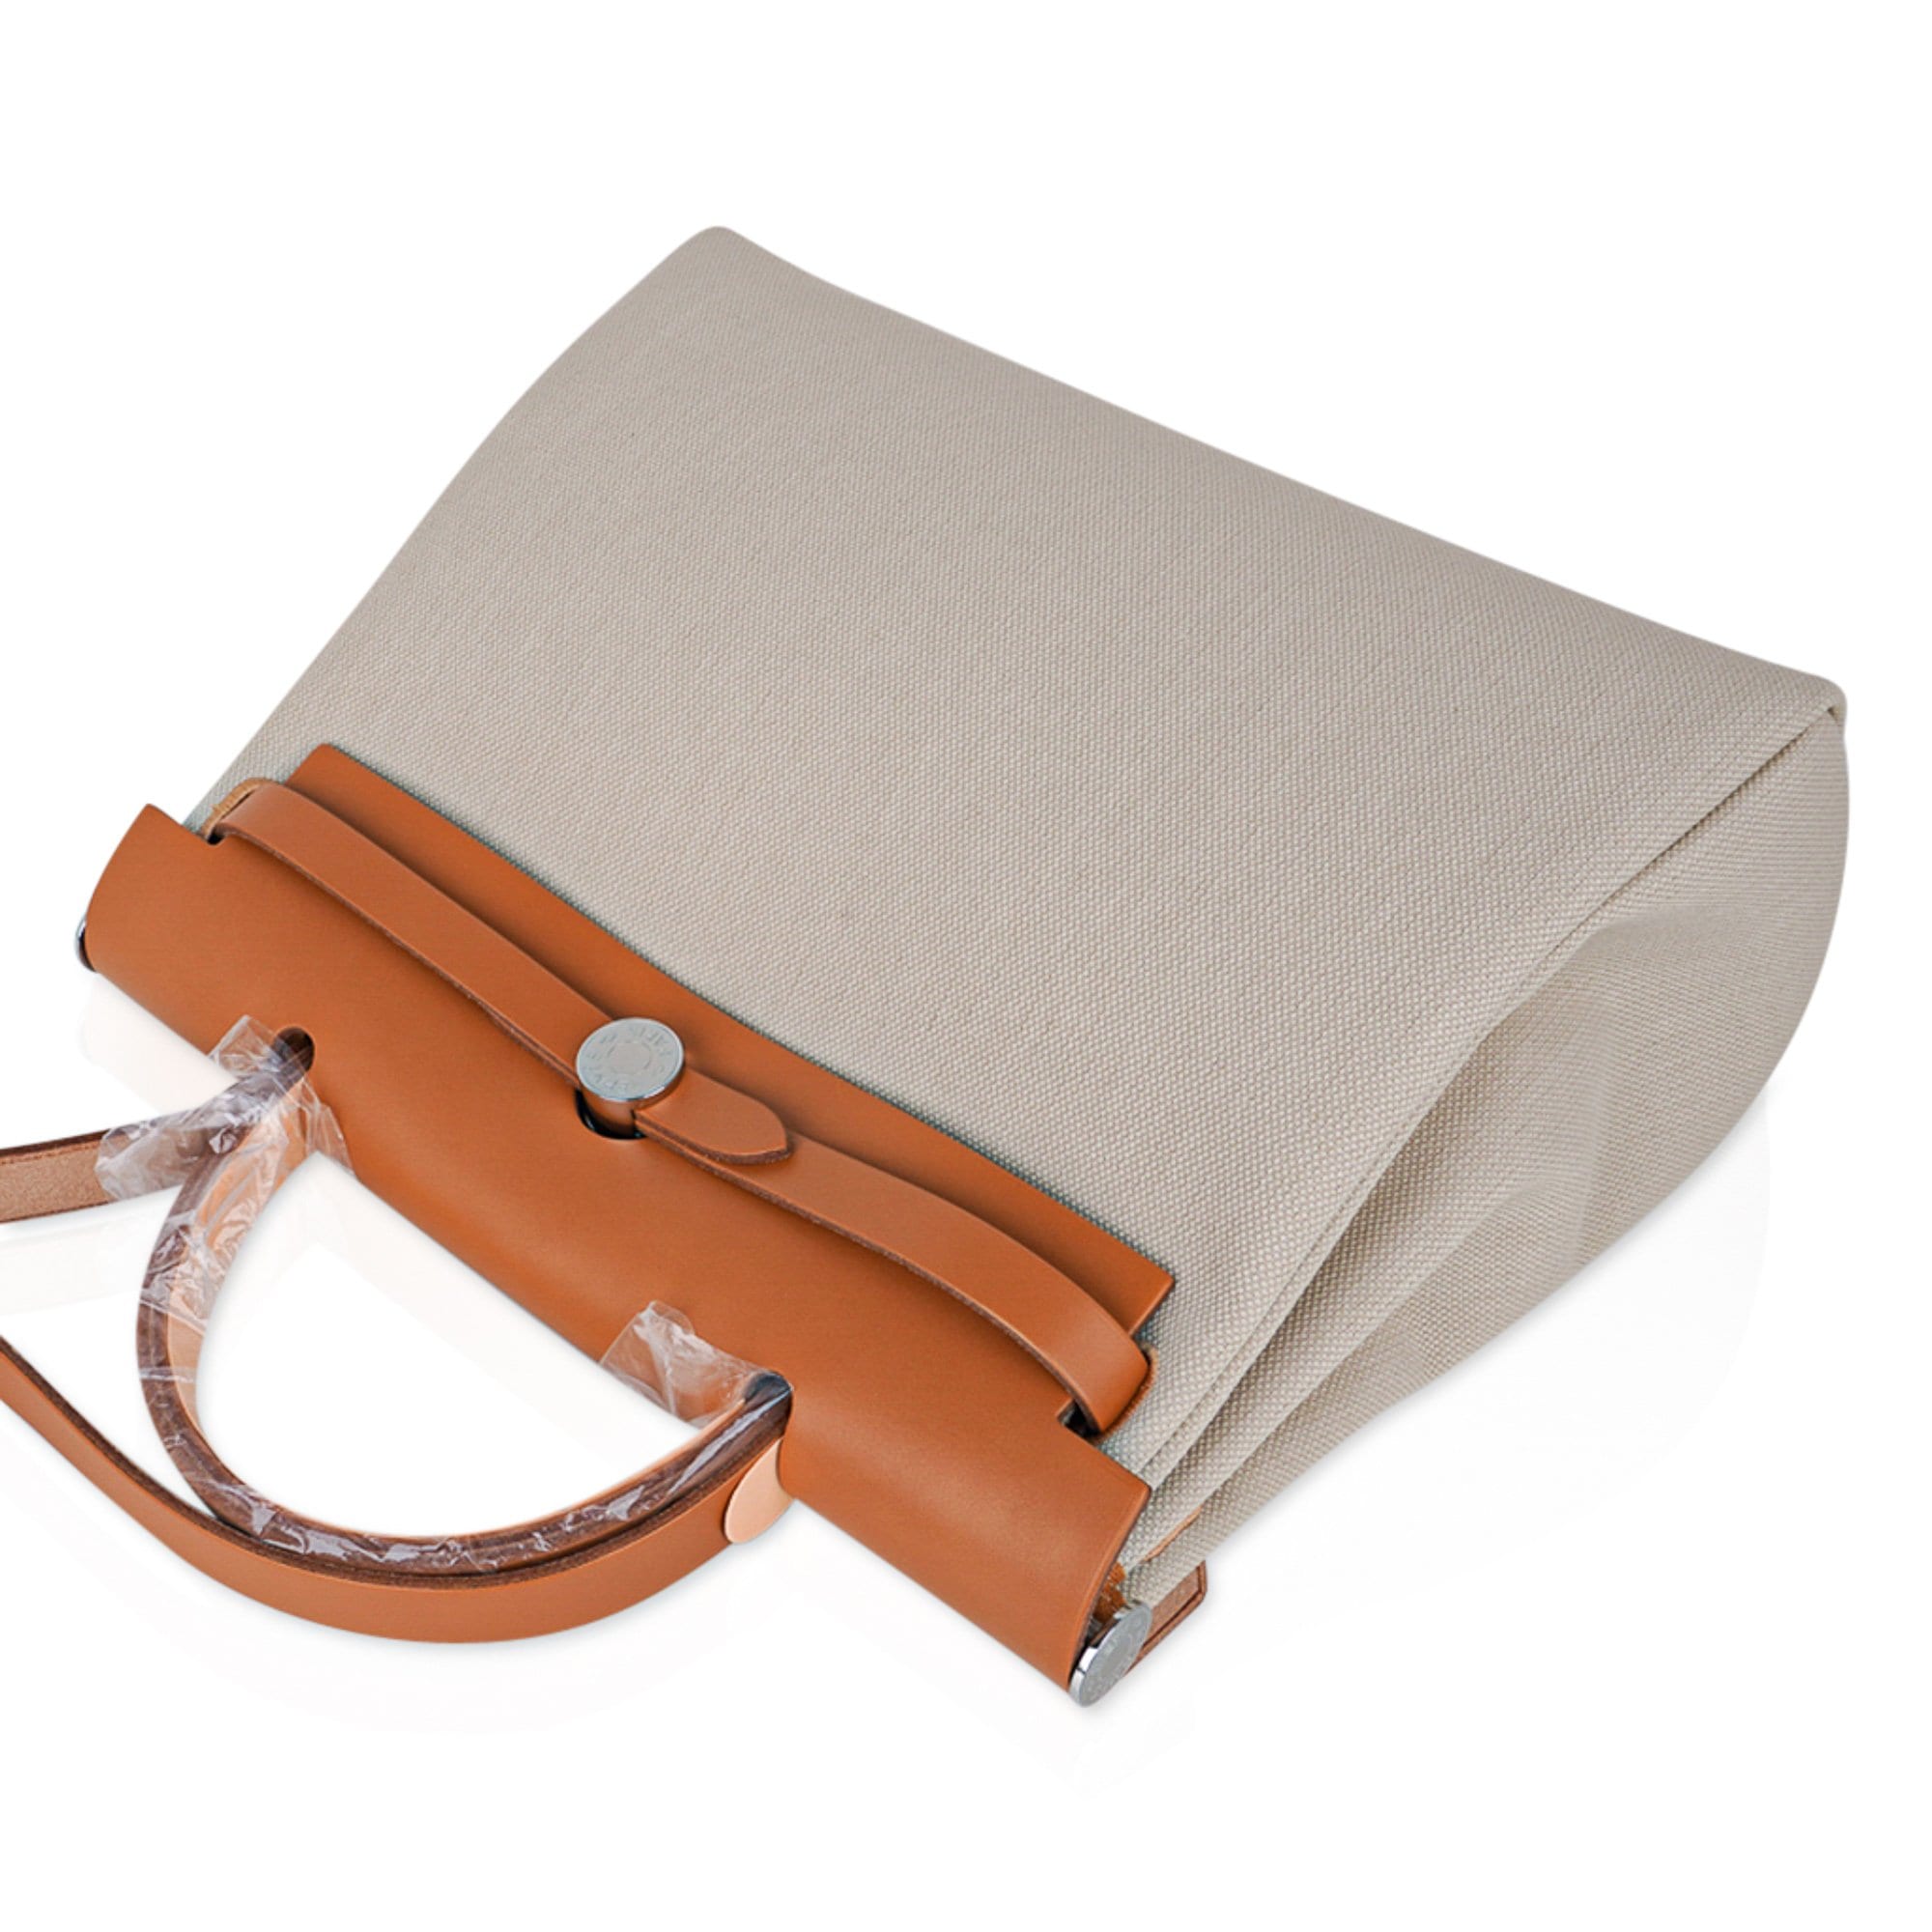 Hermes Box Leather Canvas Bolide Bag 31 Brown